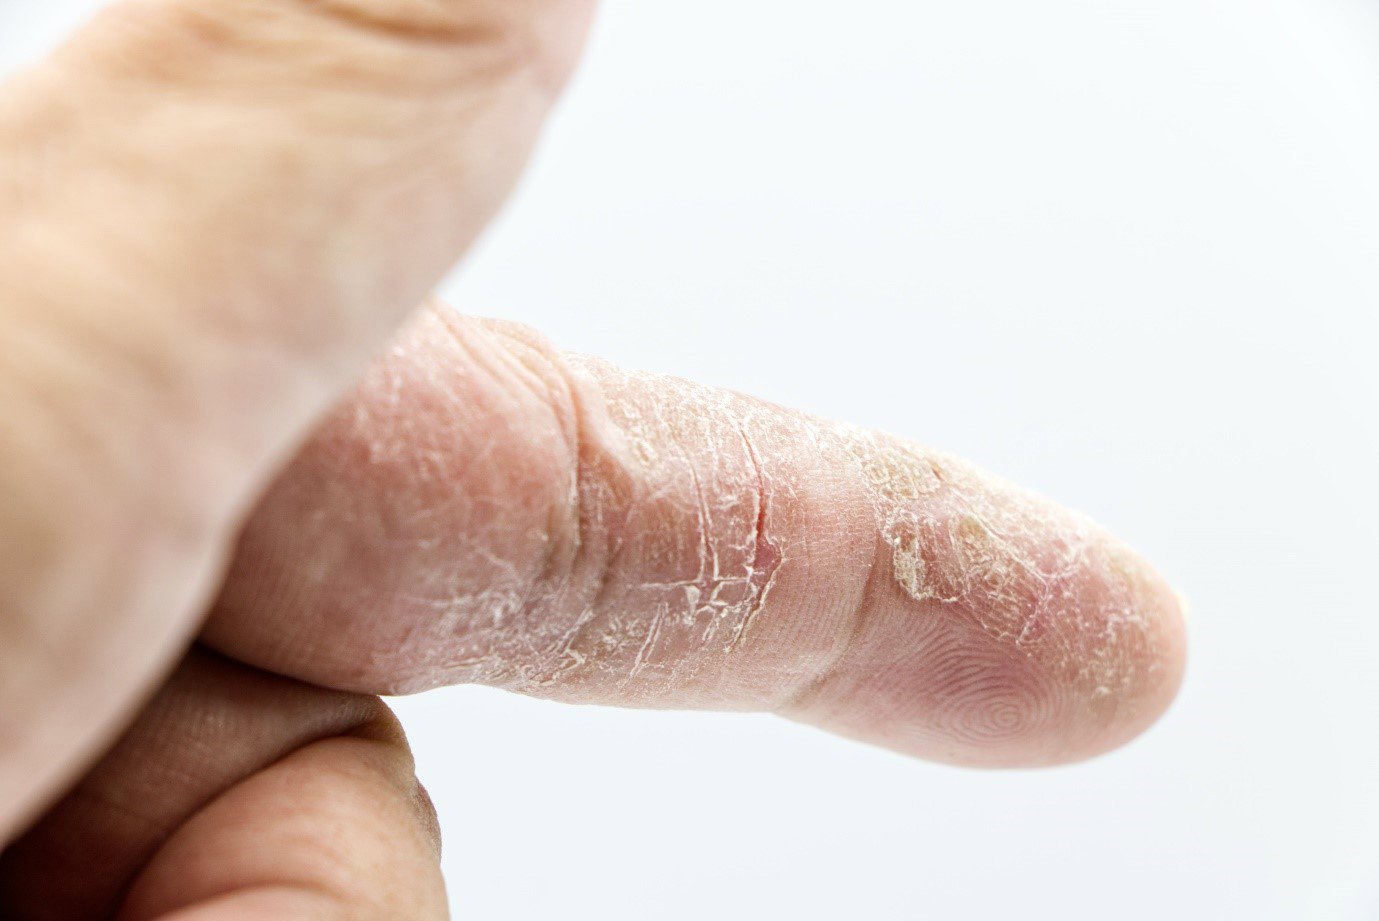 A close up of a finger with dry and cracked skin